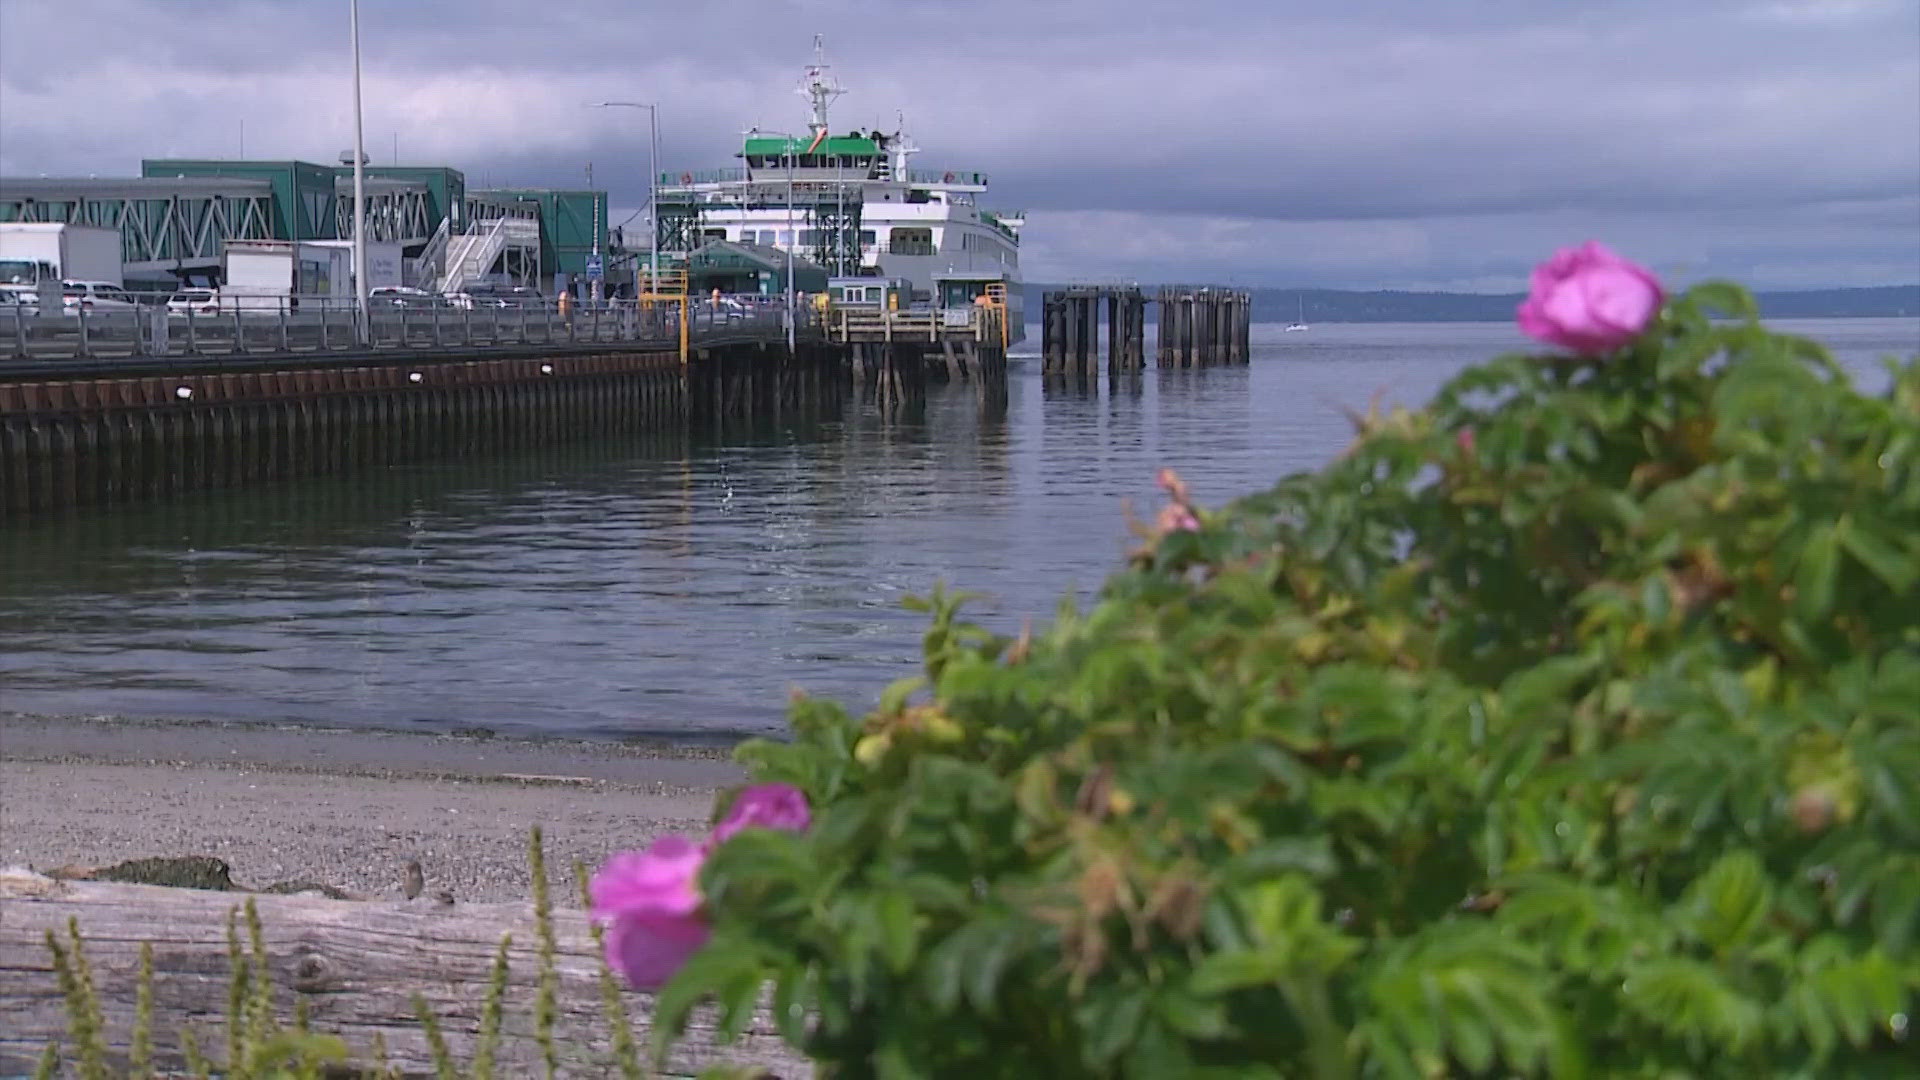 The longer wait times are due to a lack of available ferries.